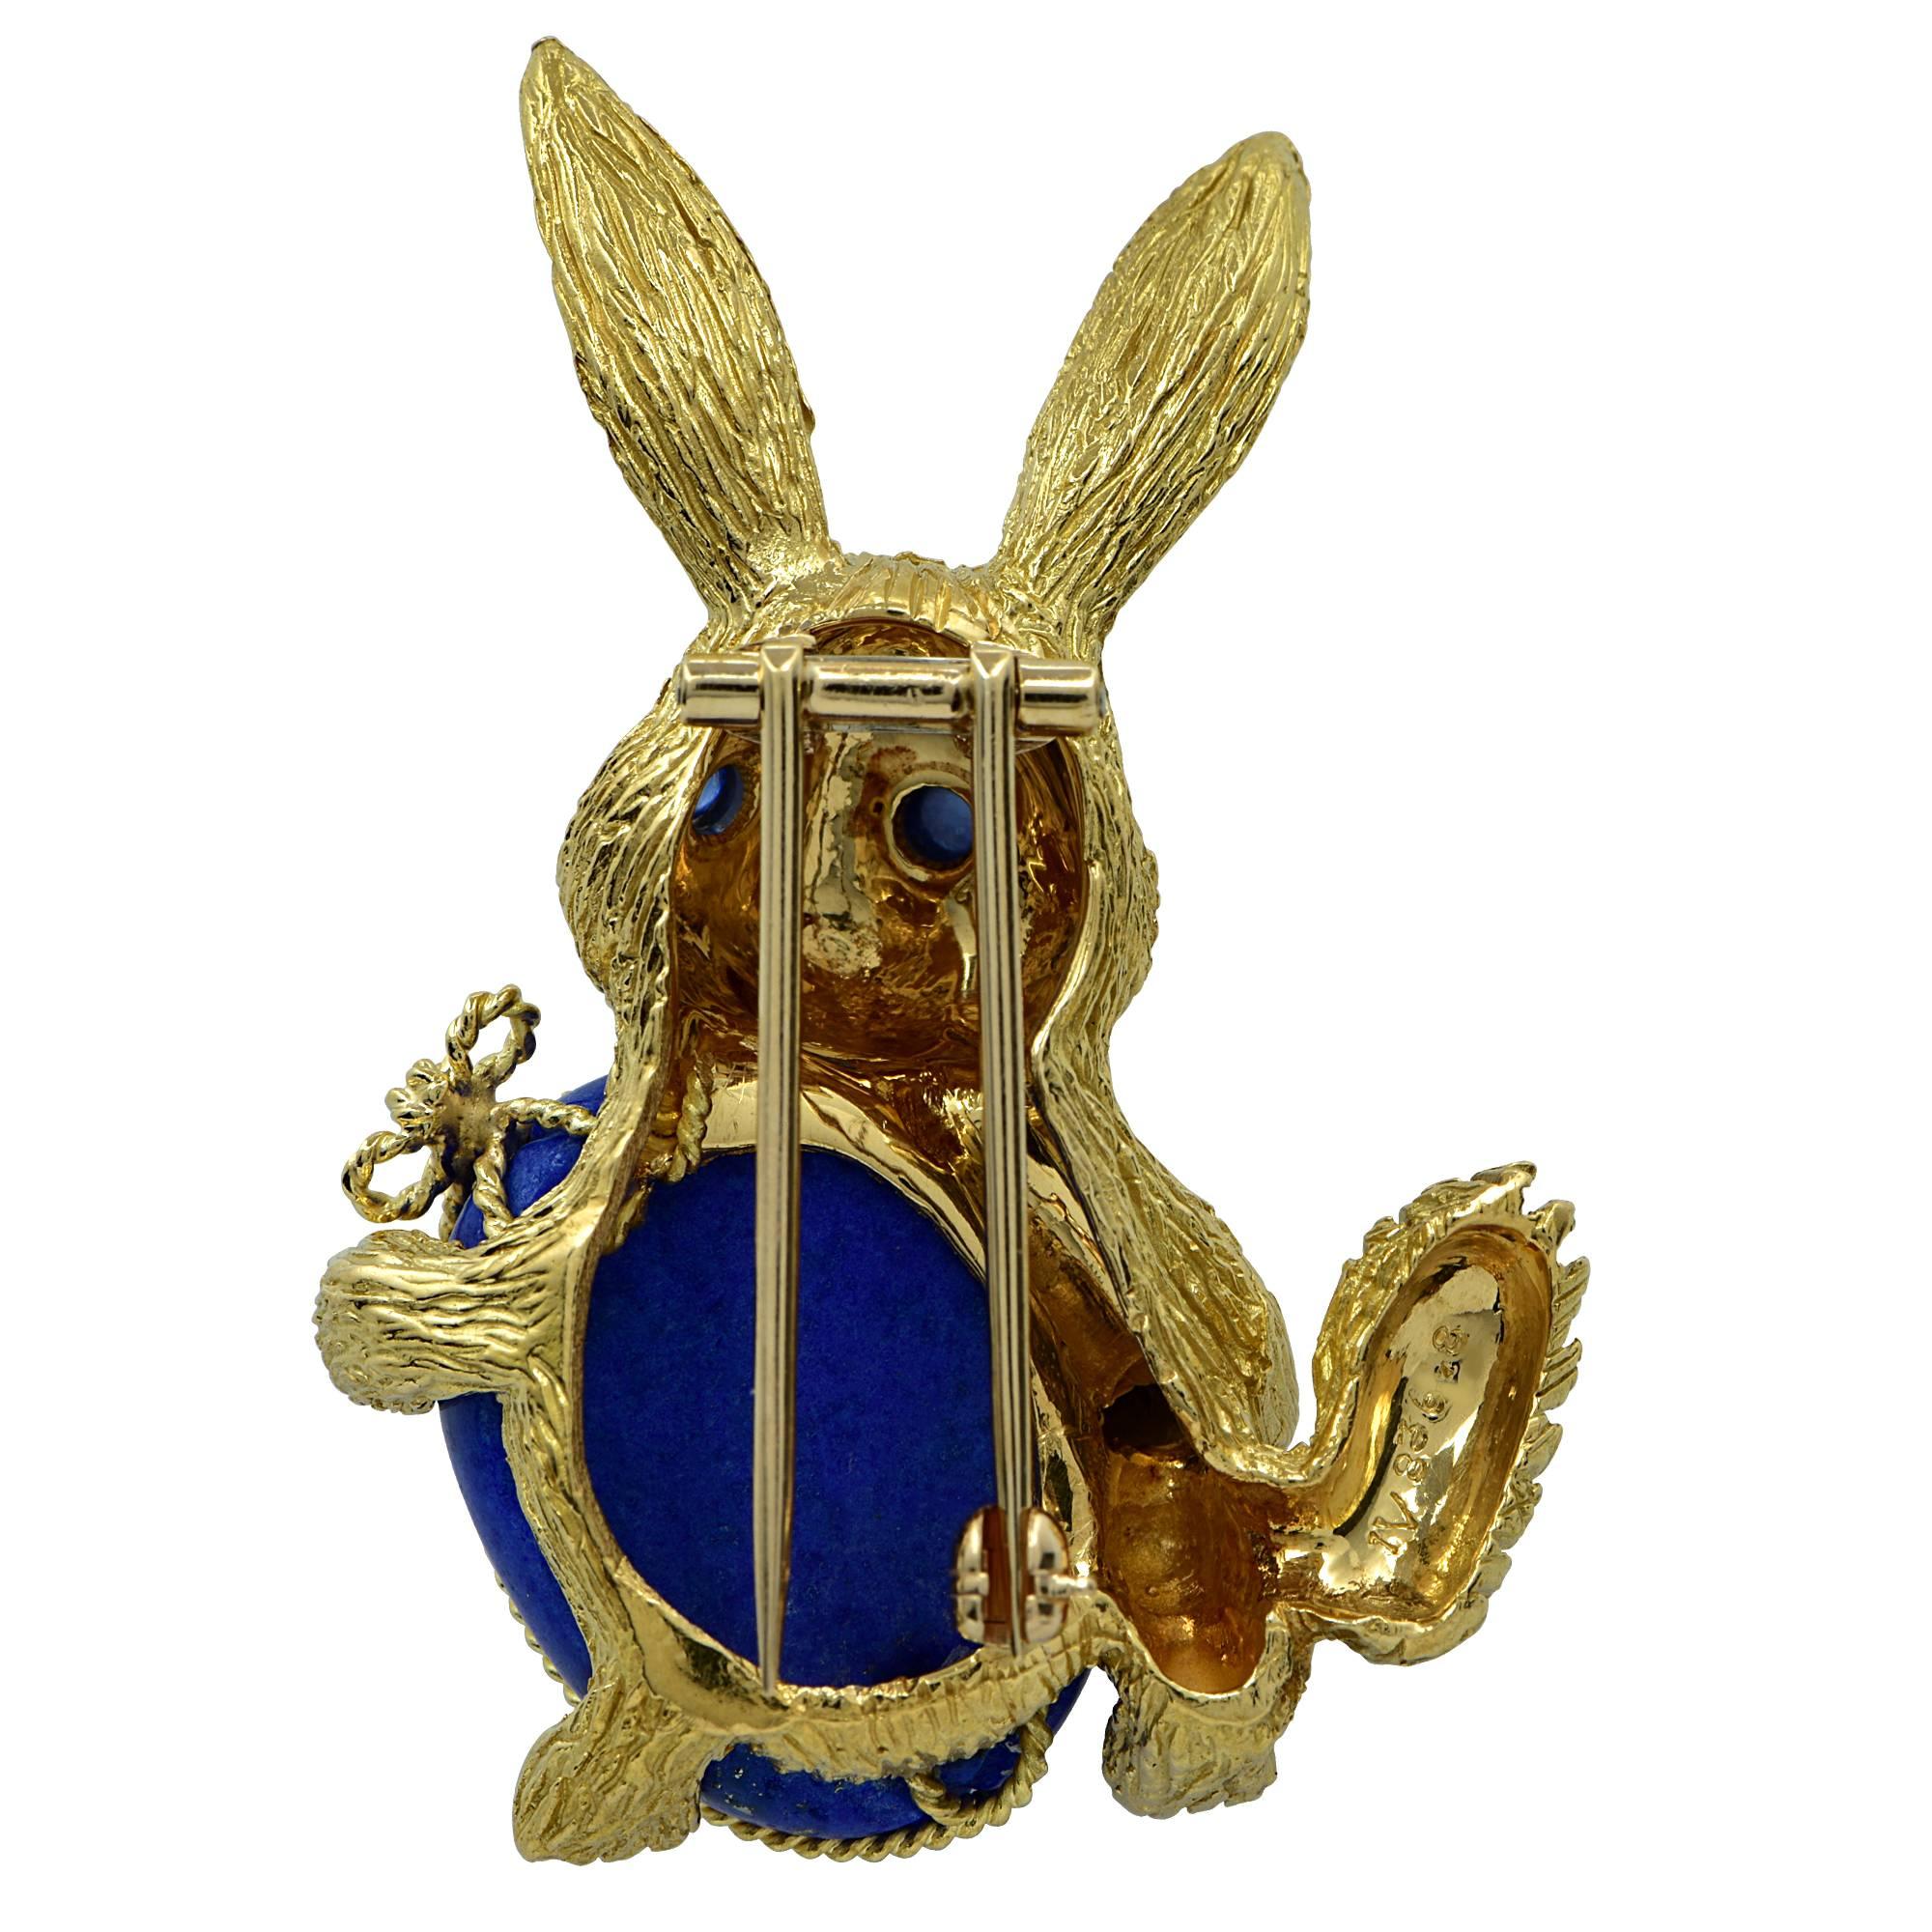 Celebrate Easter all year round with this delightful 18 Karat Yellow Gold and Lapis Easter Bunny Brooch Pin. This ornate brooch features the Easter Bunny crafted in 18 Karat Yellow Gold holding a blue Lapis Easter Egg weighing approximately 19.5